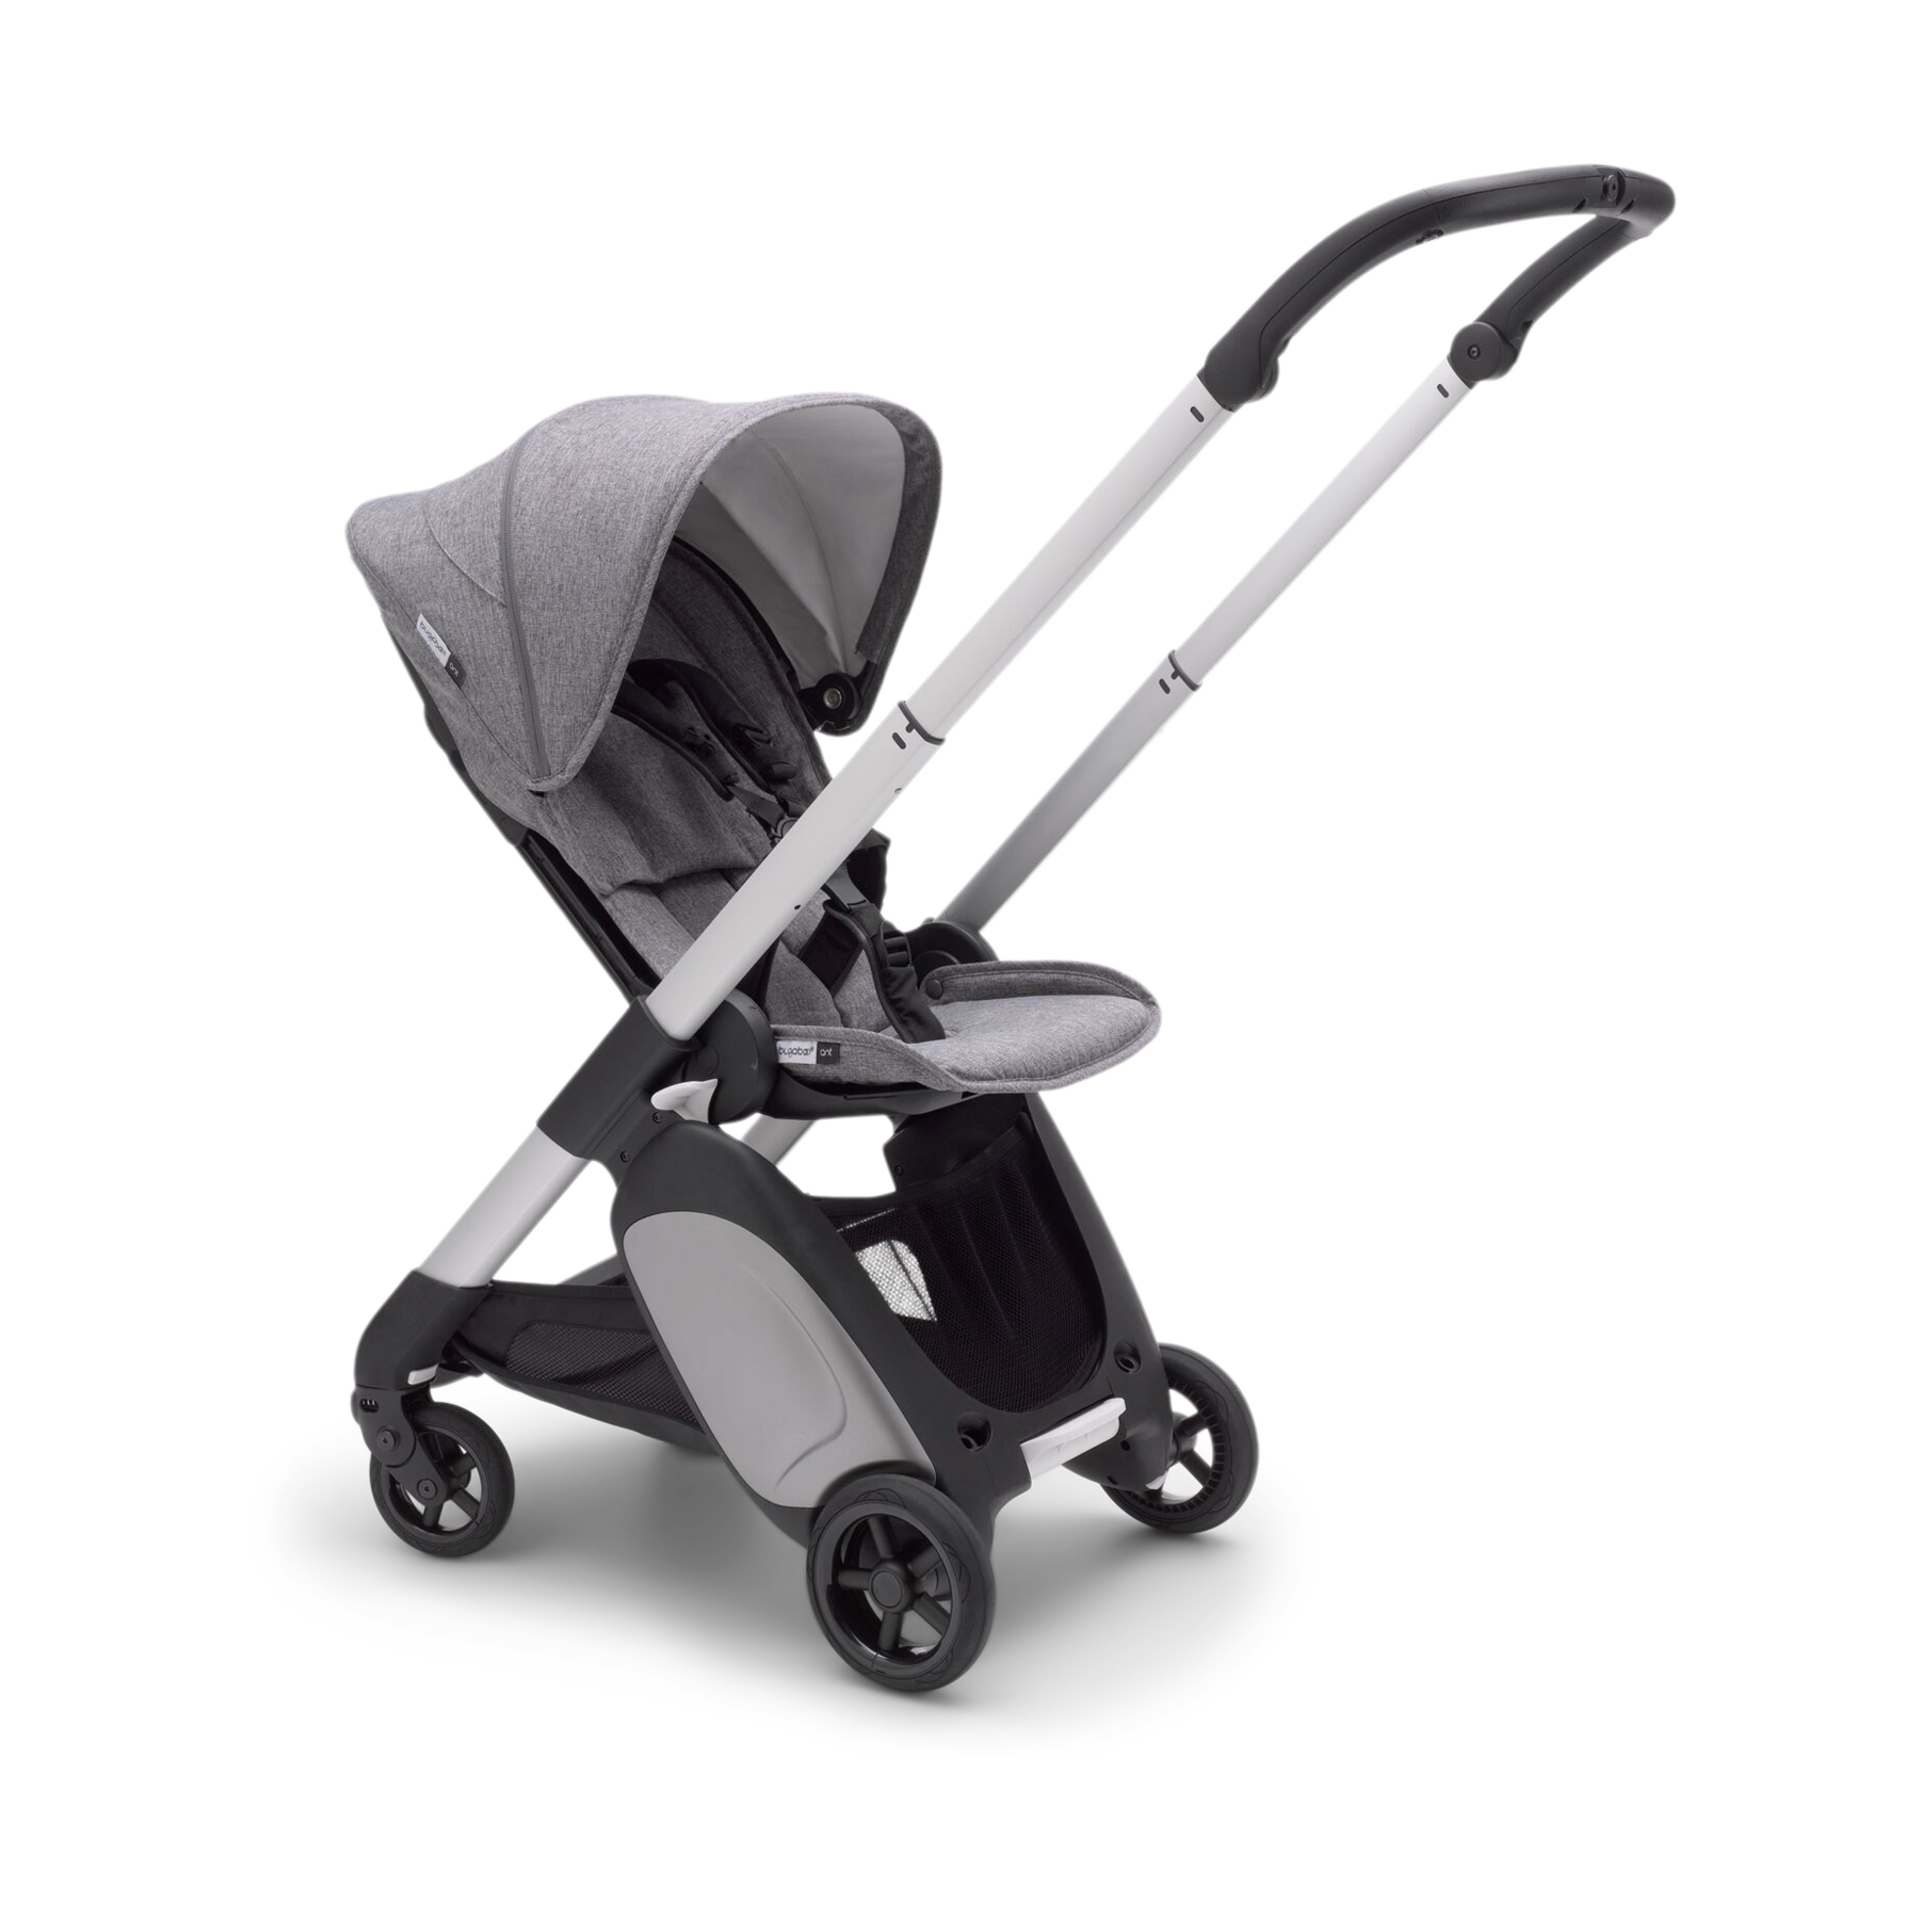 stroller to fit overhead compartment